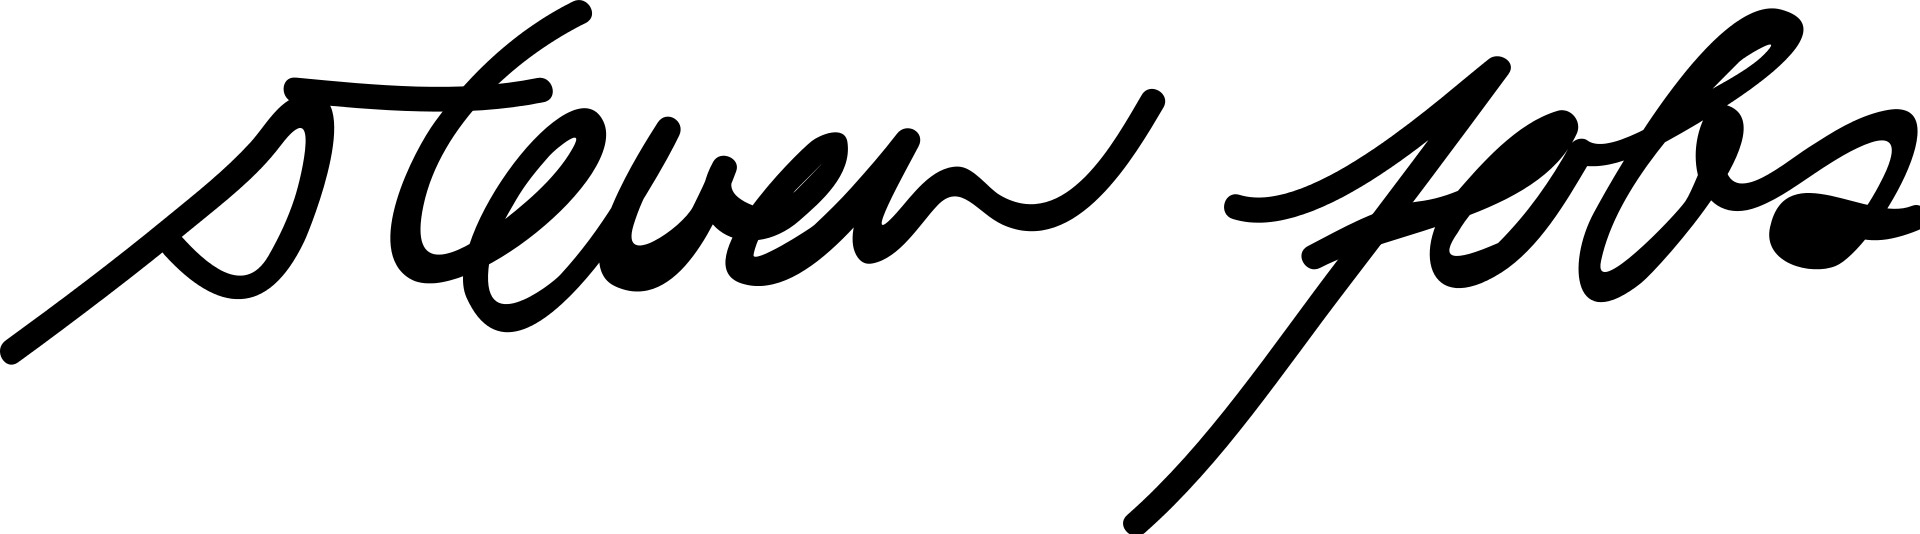 official signature of celebrity Steve Jobs